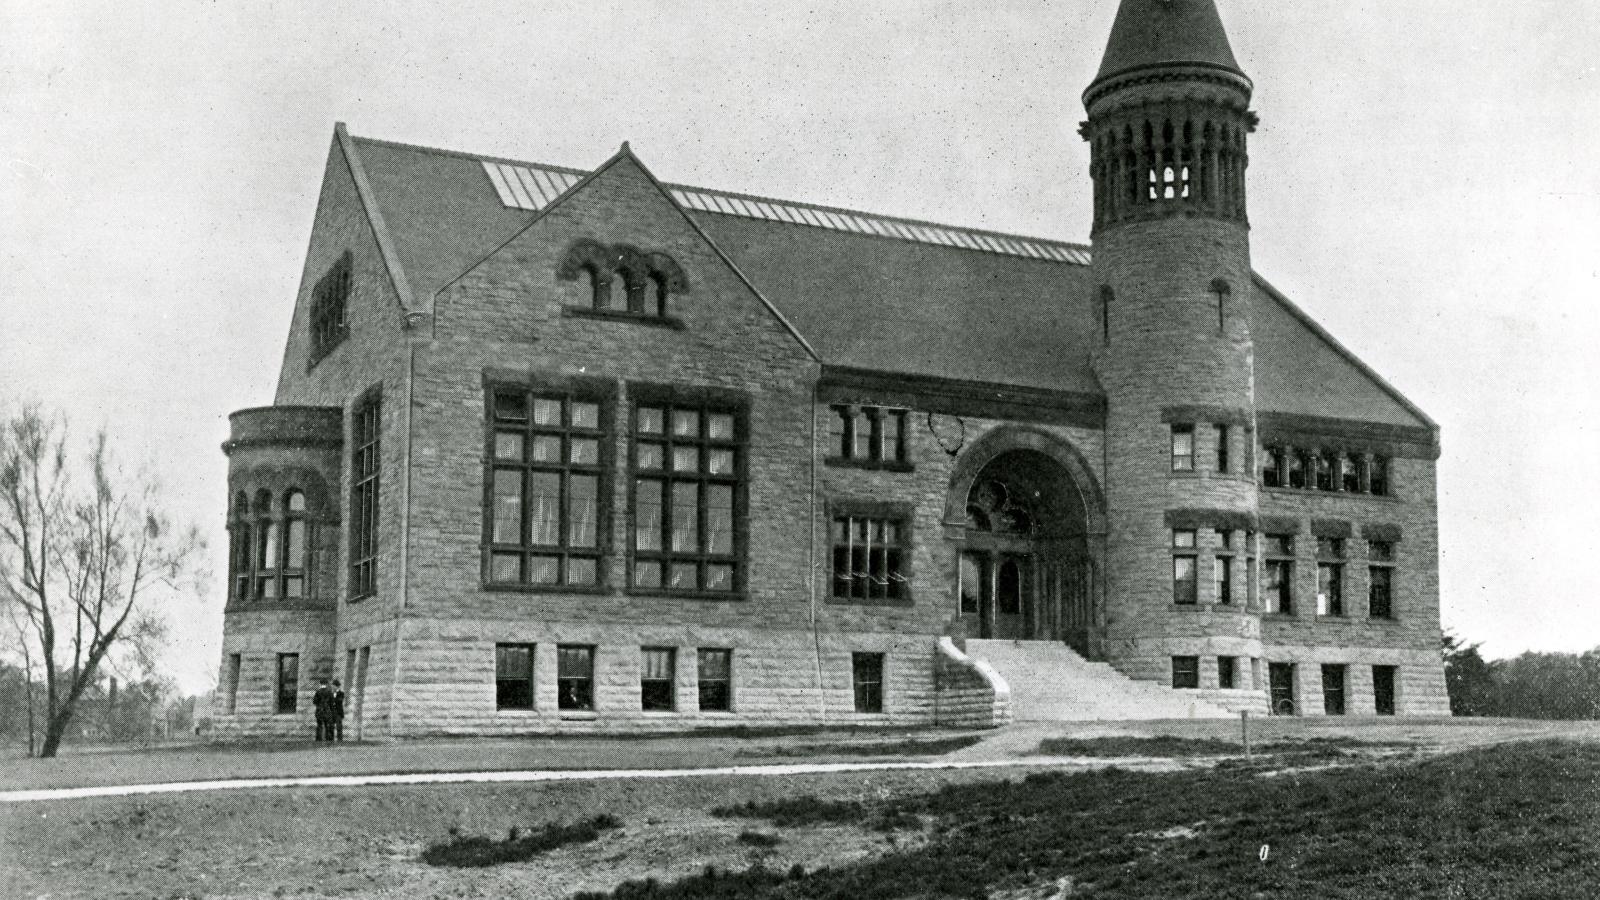 Black and white photo of Orton Hall from 1895